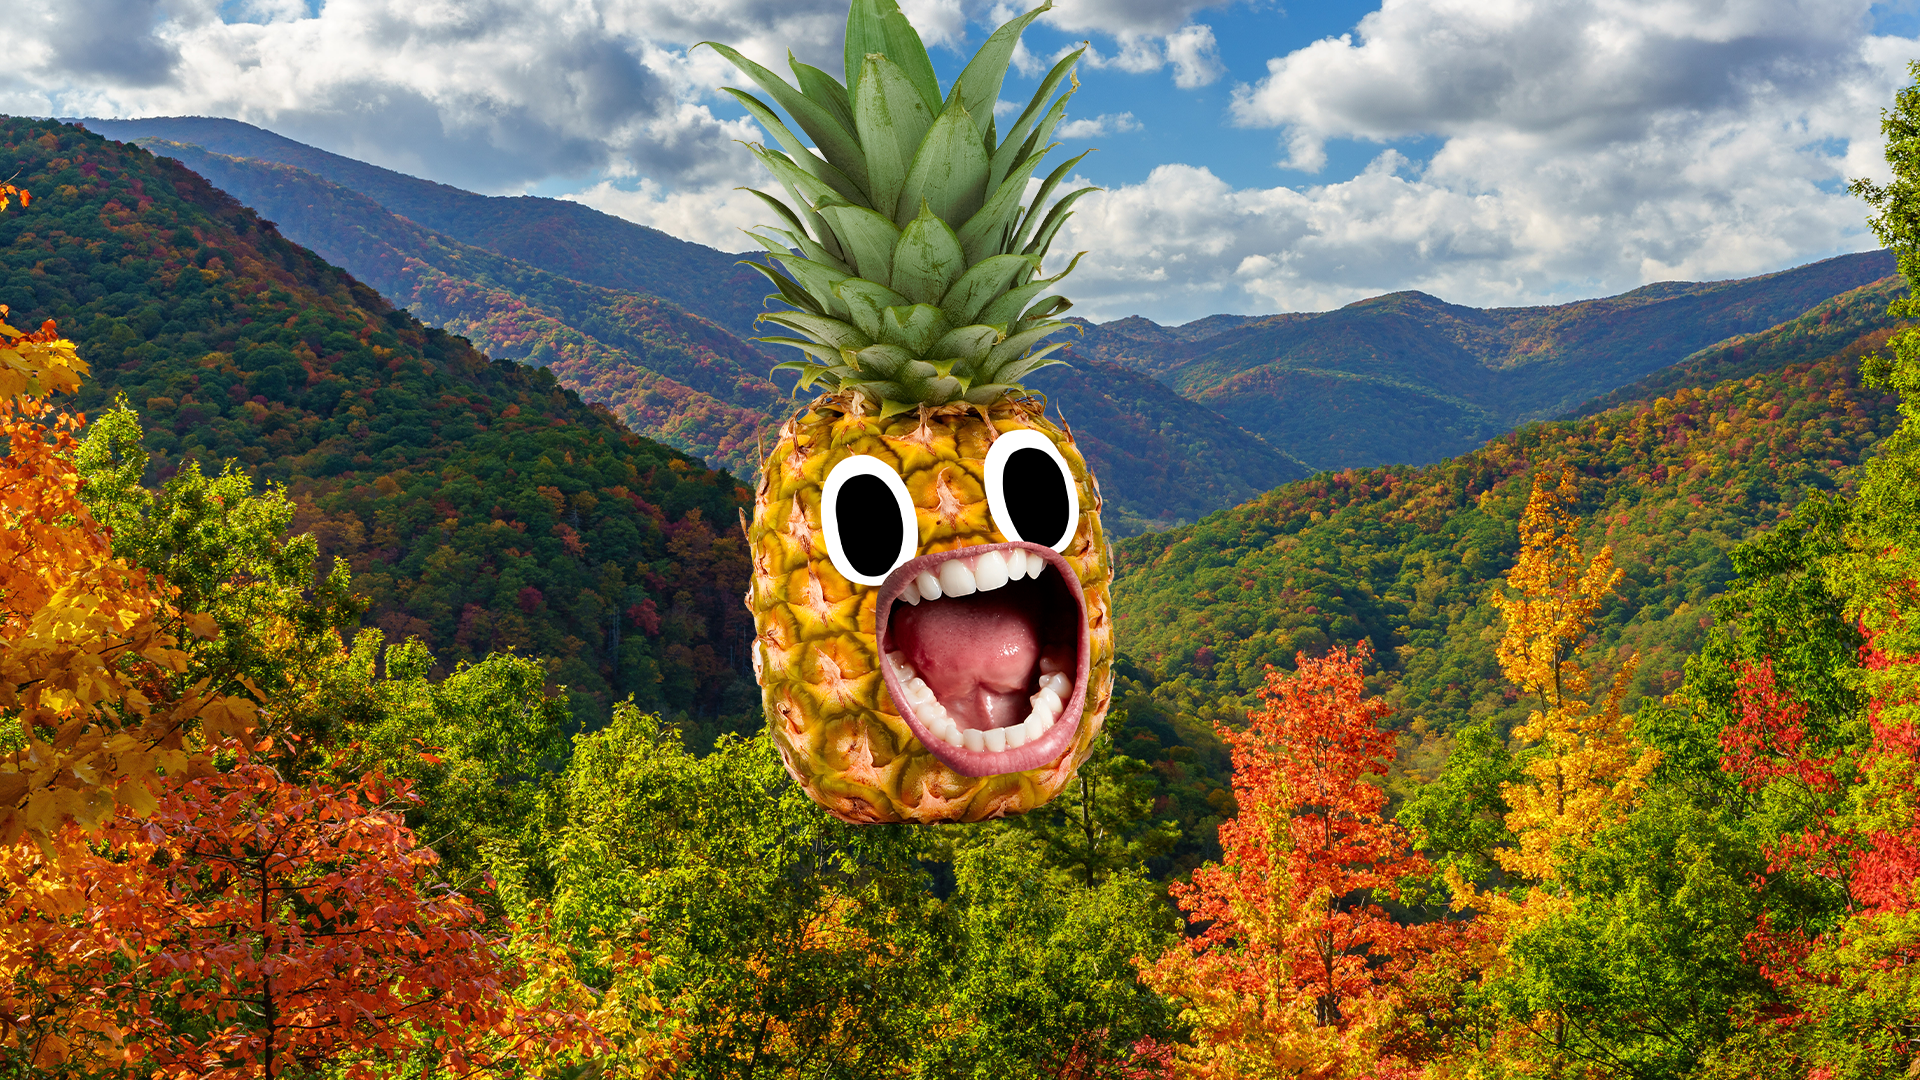 Pineapple in front of mountains